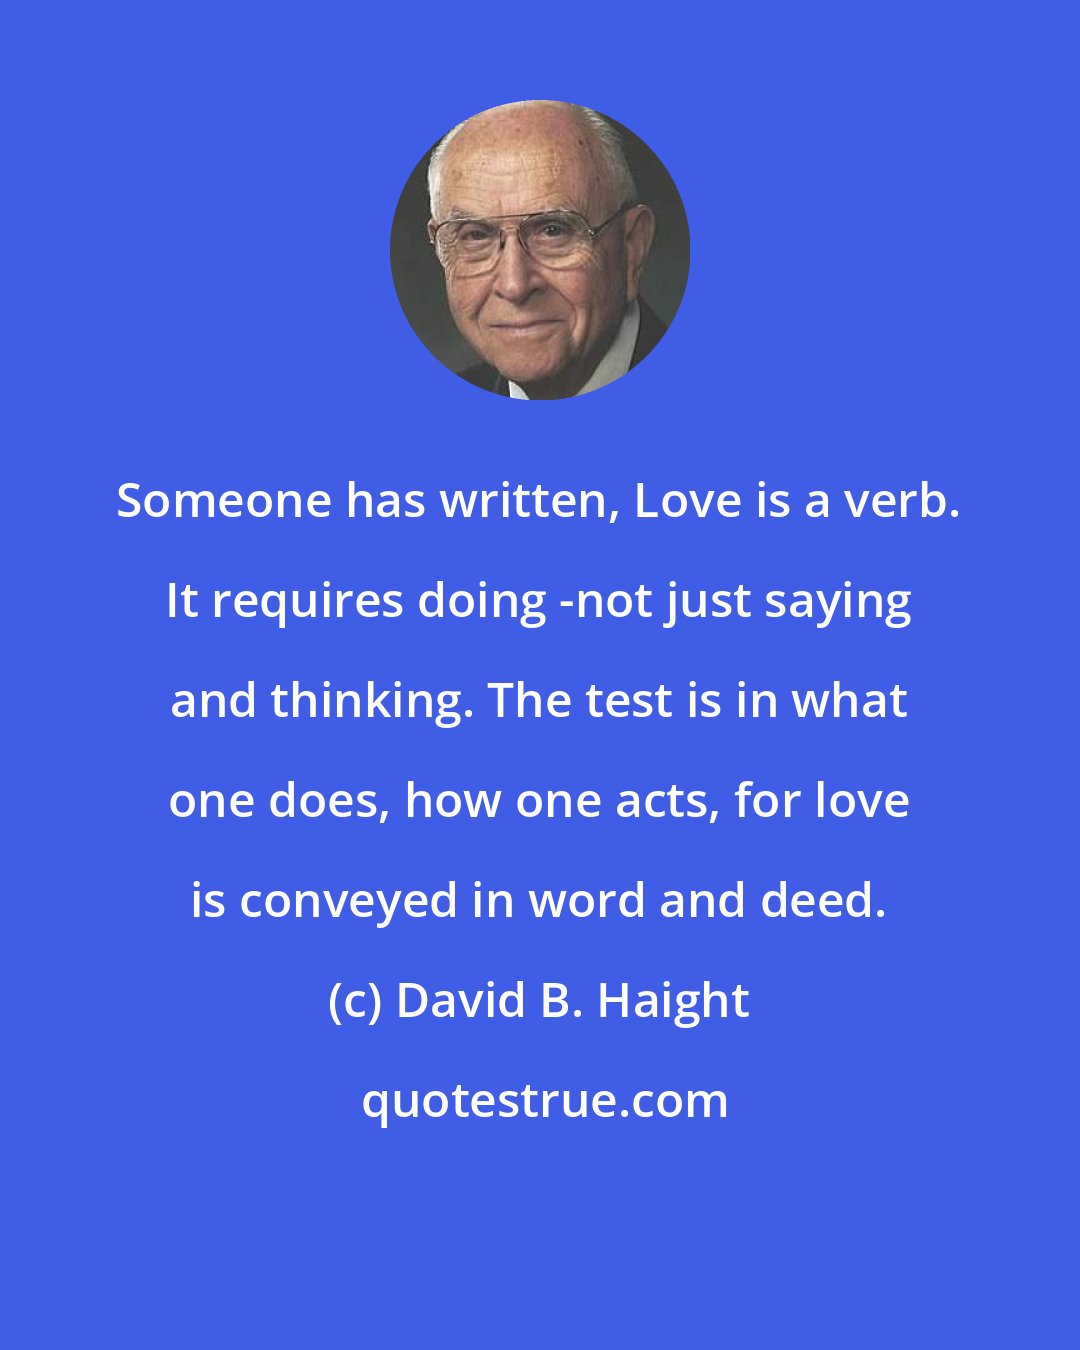 David B. Haight: Someone has written, Love is a verb. It requires doing -not just saying and thinking. The test is in what one does, how one acts, for love is conveyed in word and deed.